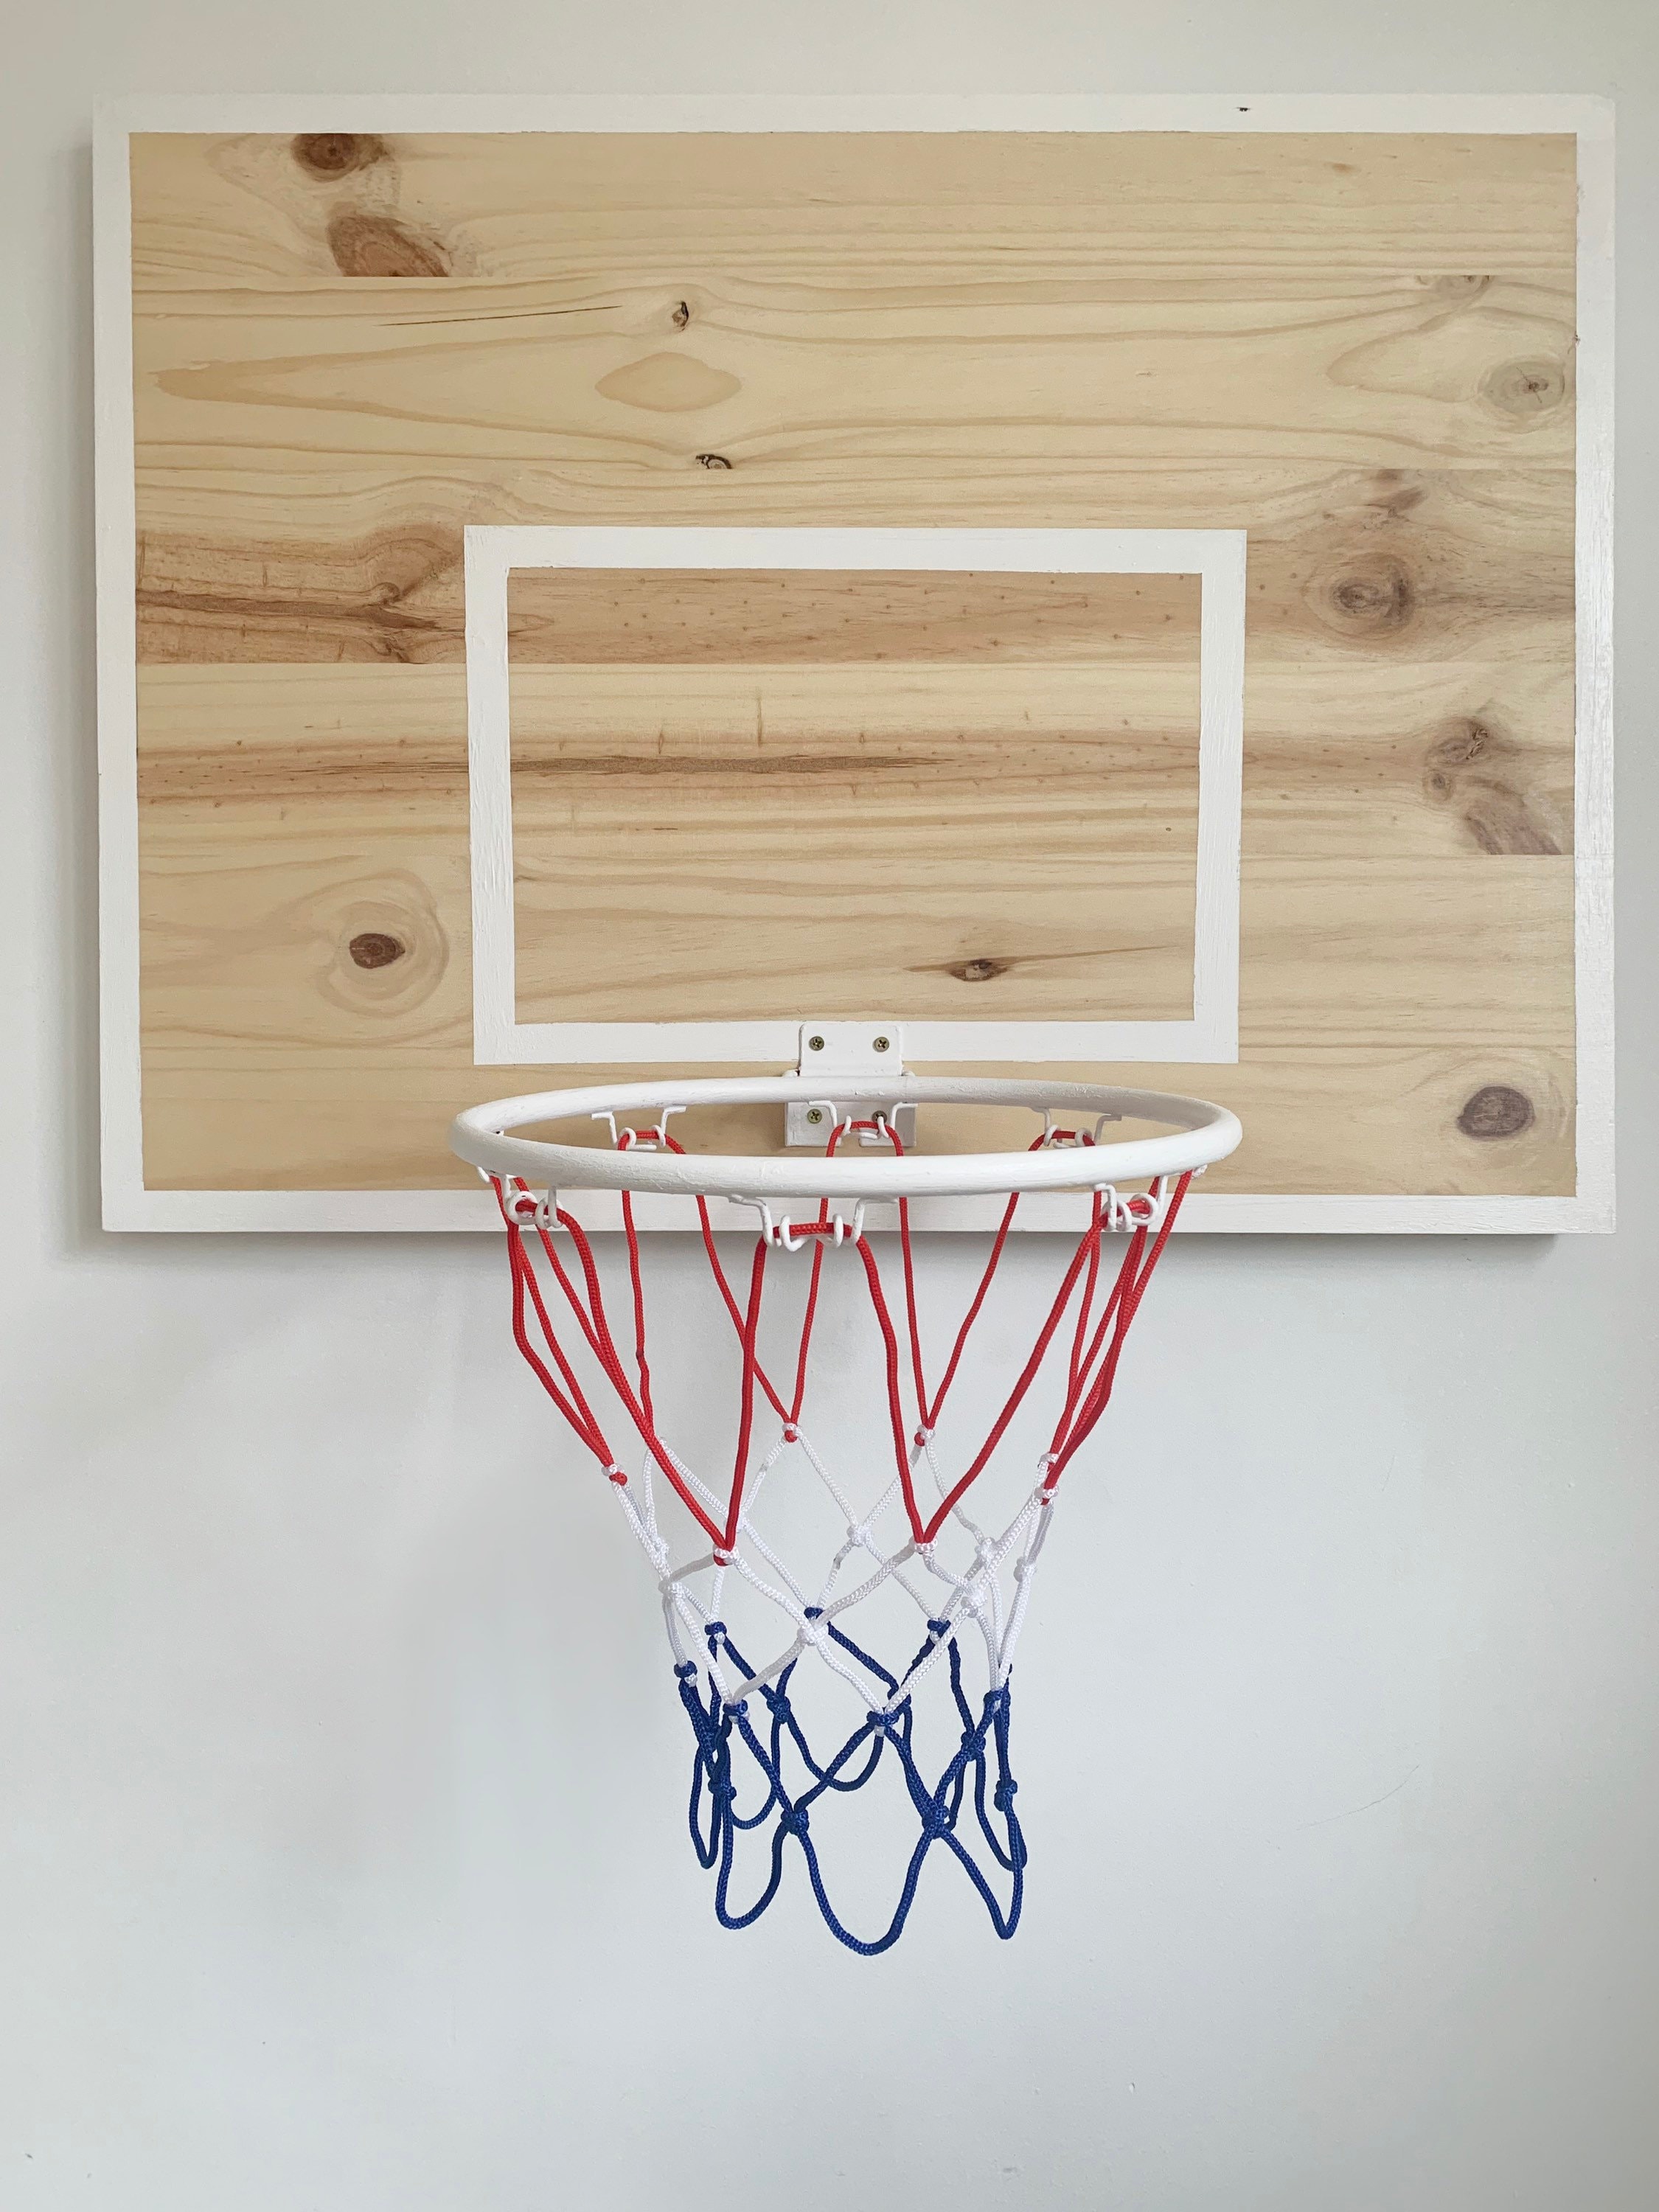 Over-the-Door Basketball Hoop with Wood Backboard – A Pretty Happy Home